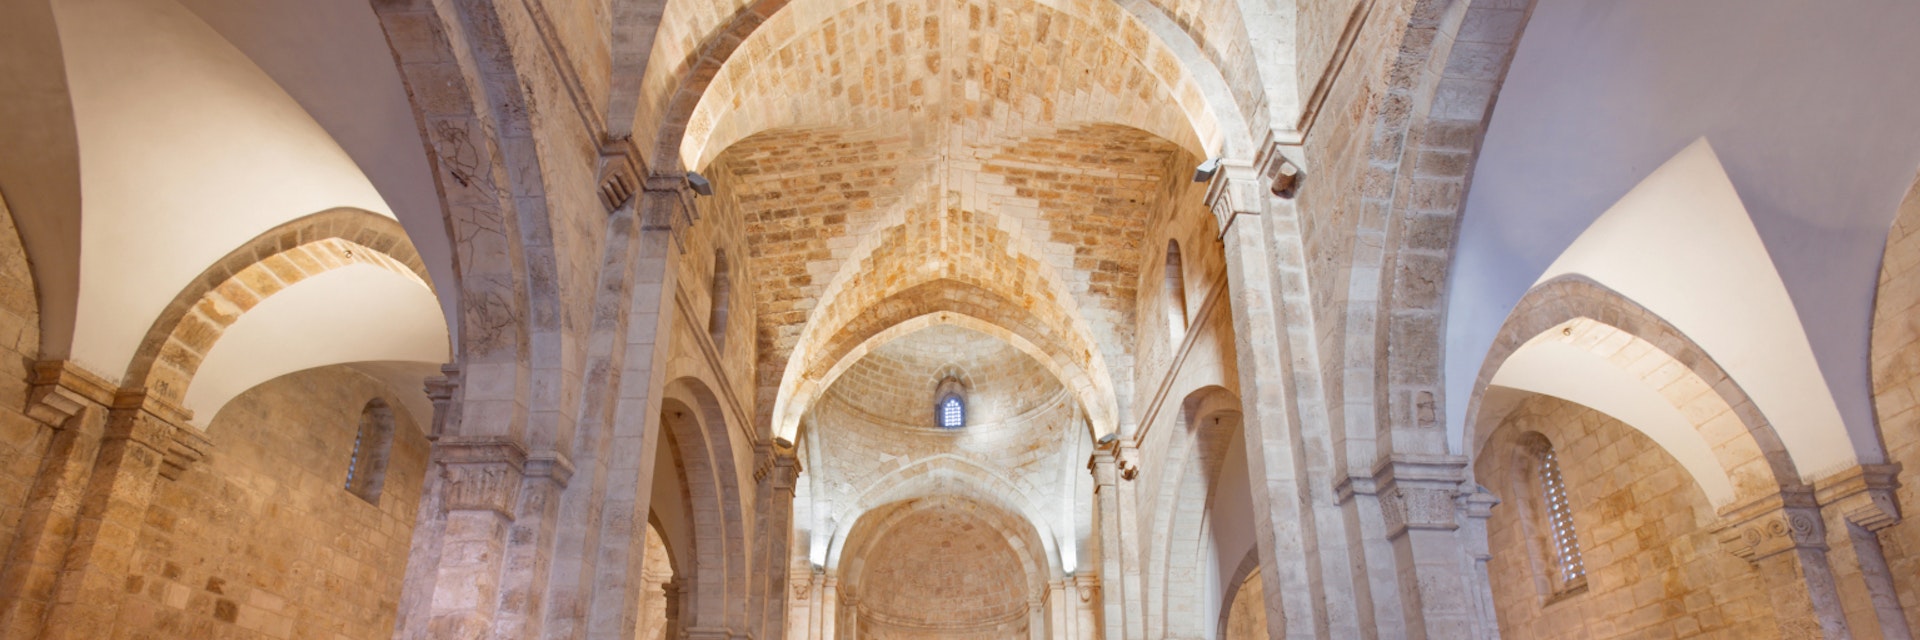 Jerusalem - The gothic nave of St. Anne gothic church as the first station of Via Dolorosa or Via crucis.